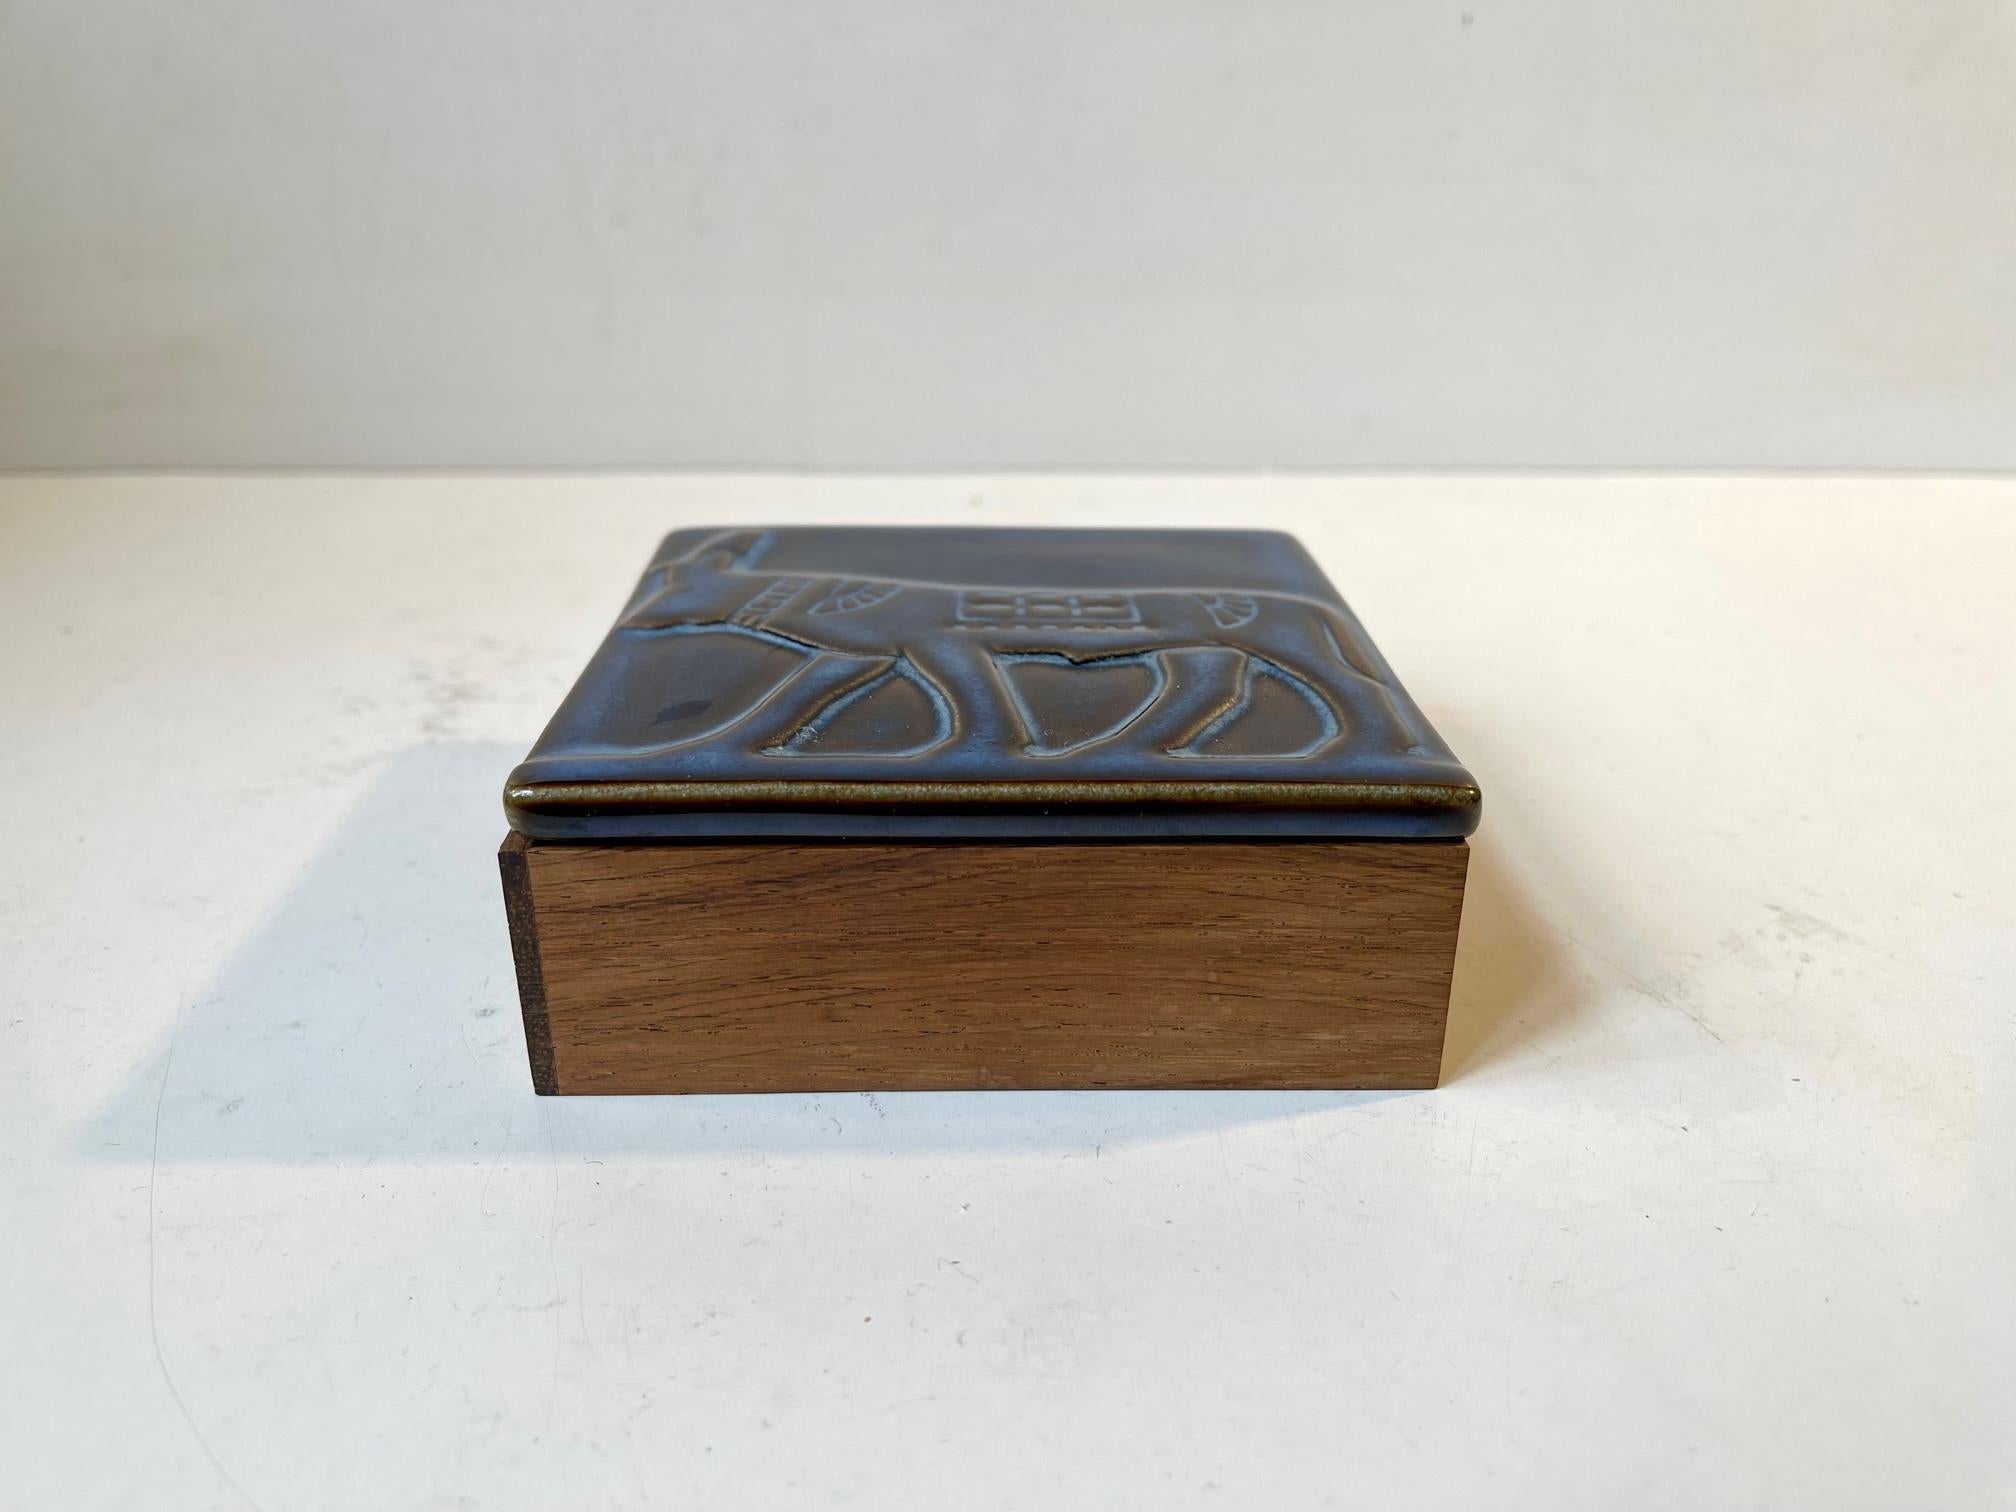 High-quality desk cigarette or decorative box composed of af glazed ceramic lid with a bull in relief, box-sides in solid rosewood upon af plate in black formica. The lid was designed by ceramist Einar Johansen and made at Søholm in Denmark for